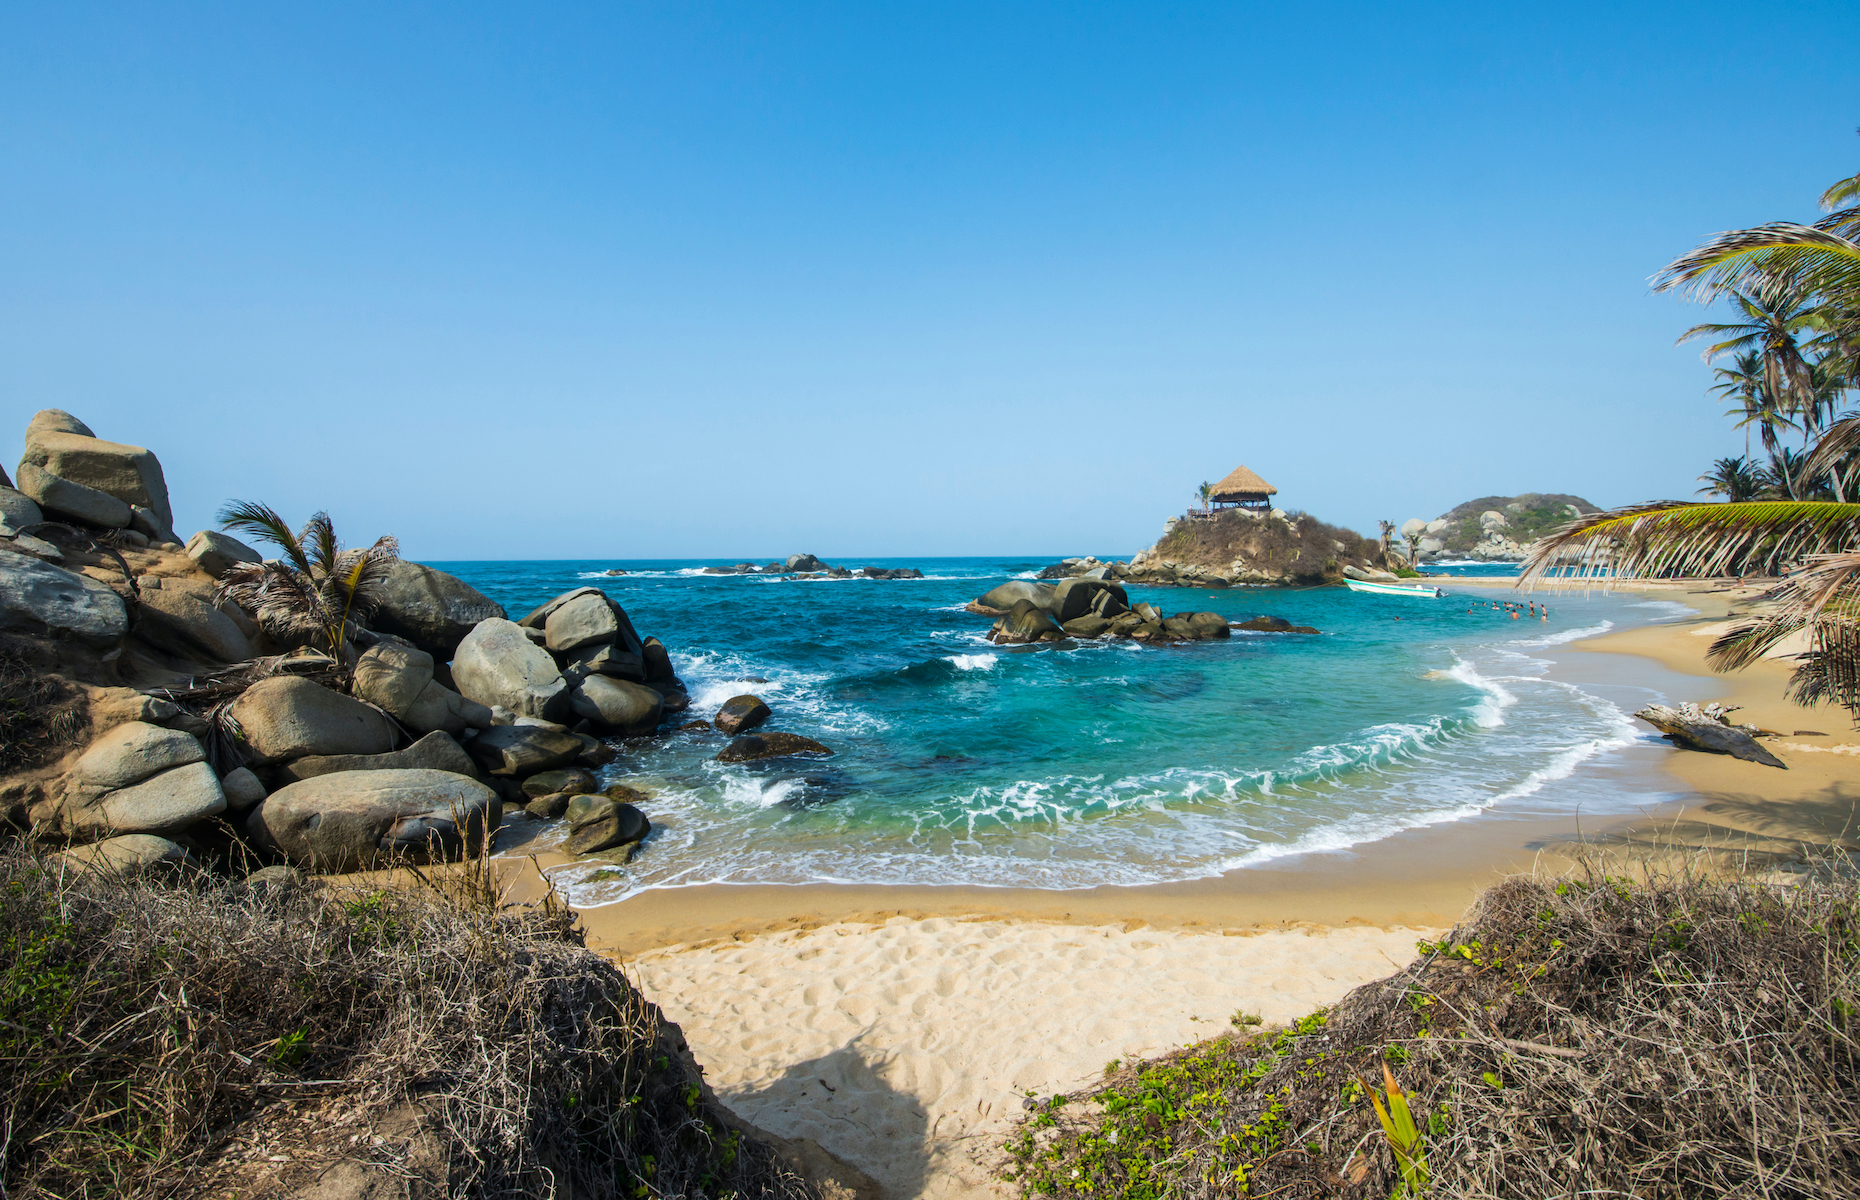 Located in northern Colombia, <a href="https://www.parquetayrona.com/en/" rel="noreferrer noopener">Tayrona National Park</a> is a protected area featuring wild landscapes, coastal Caribbean lagoons, and flourishing nature. It has some of the most spectacular beaches in the country (they’re also great for snorkelling!) and the impressive archeological site of Pueblito.